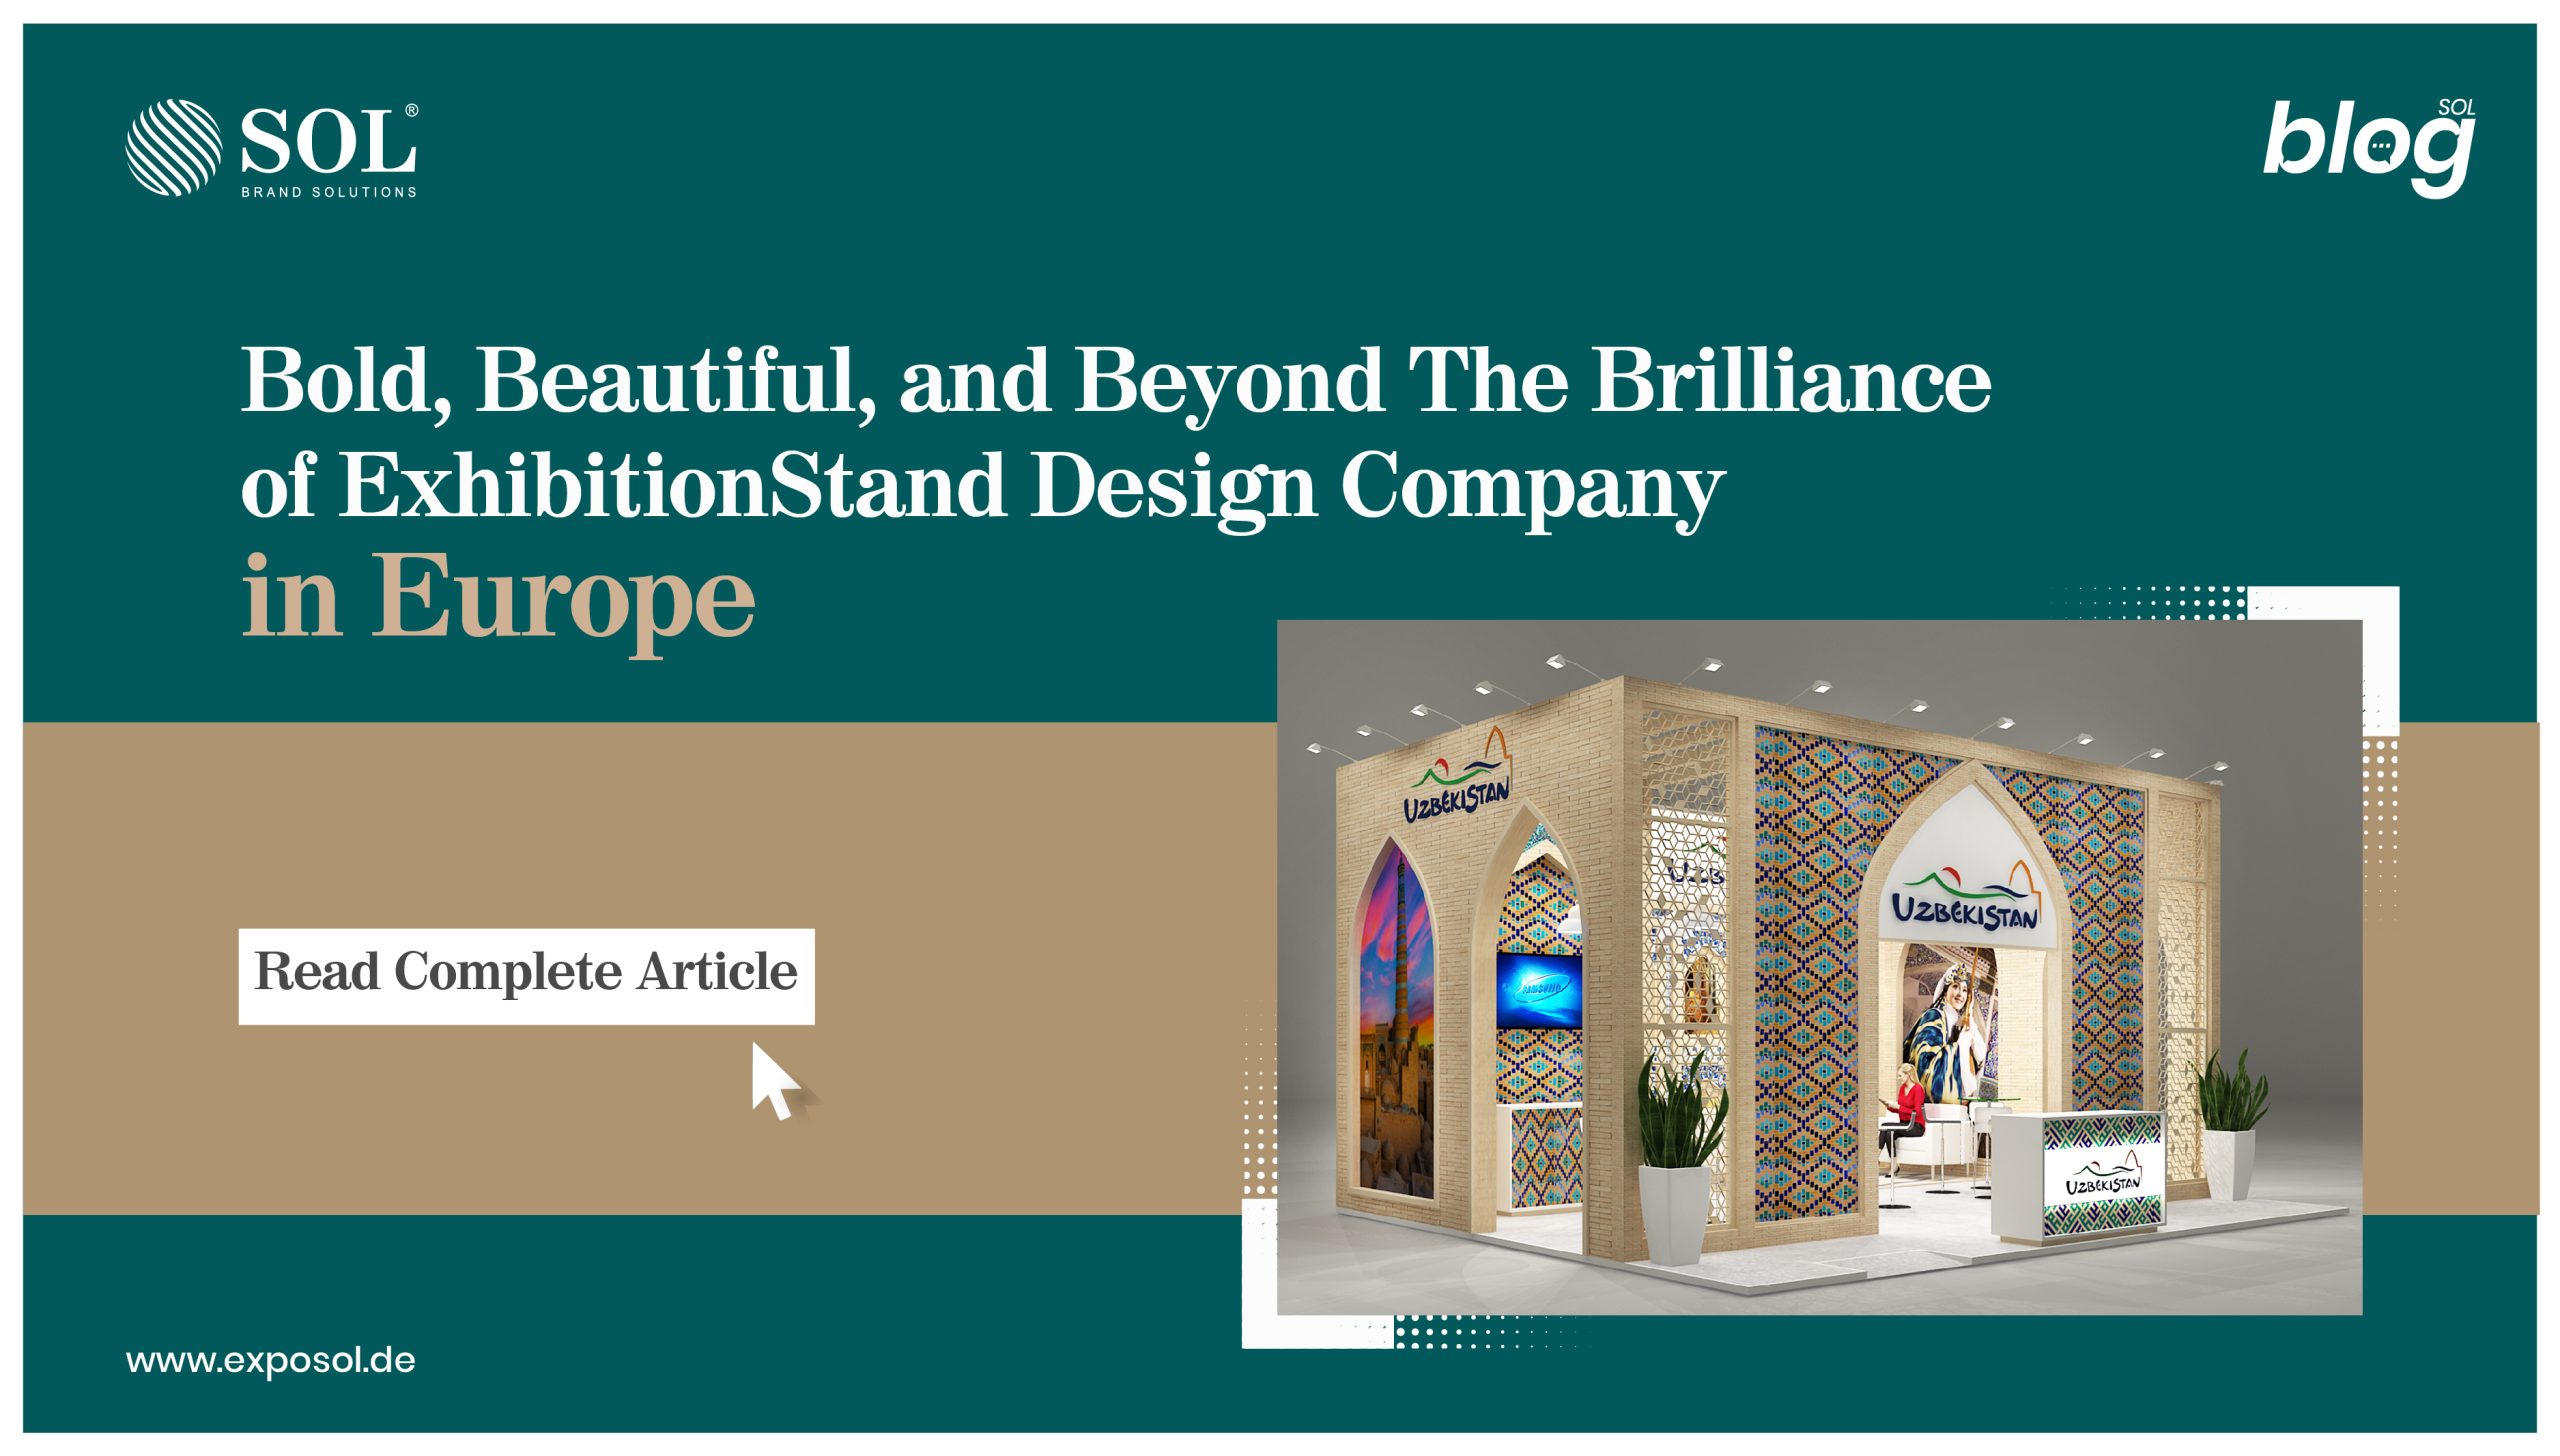 Bold, Beautiful, and Beyond: The Brilliance of Exhibition Stand Design Company in Europe